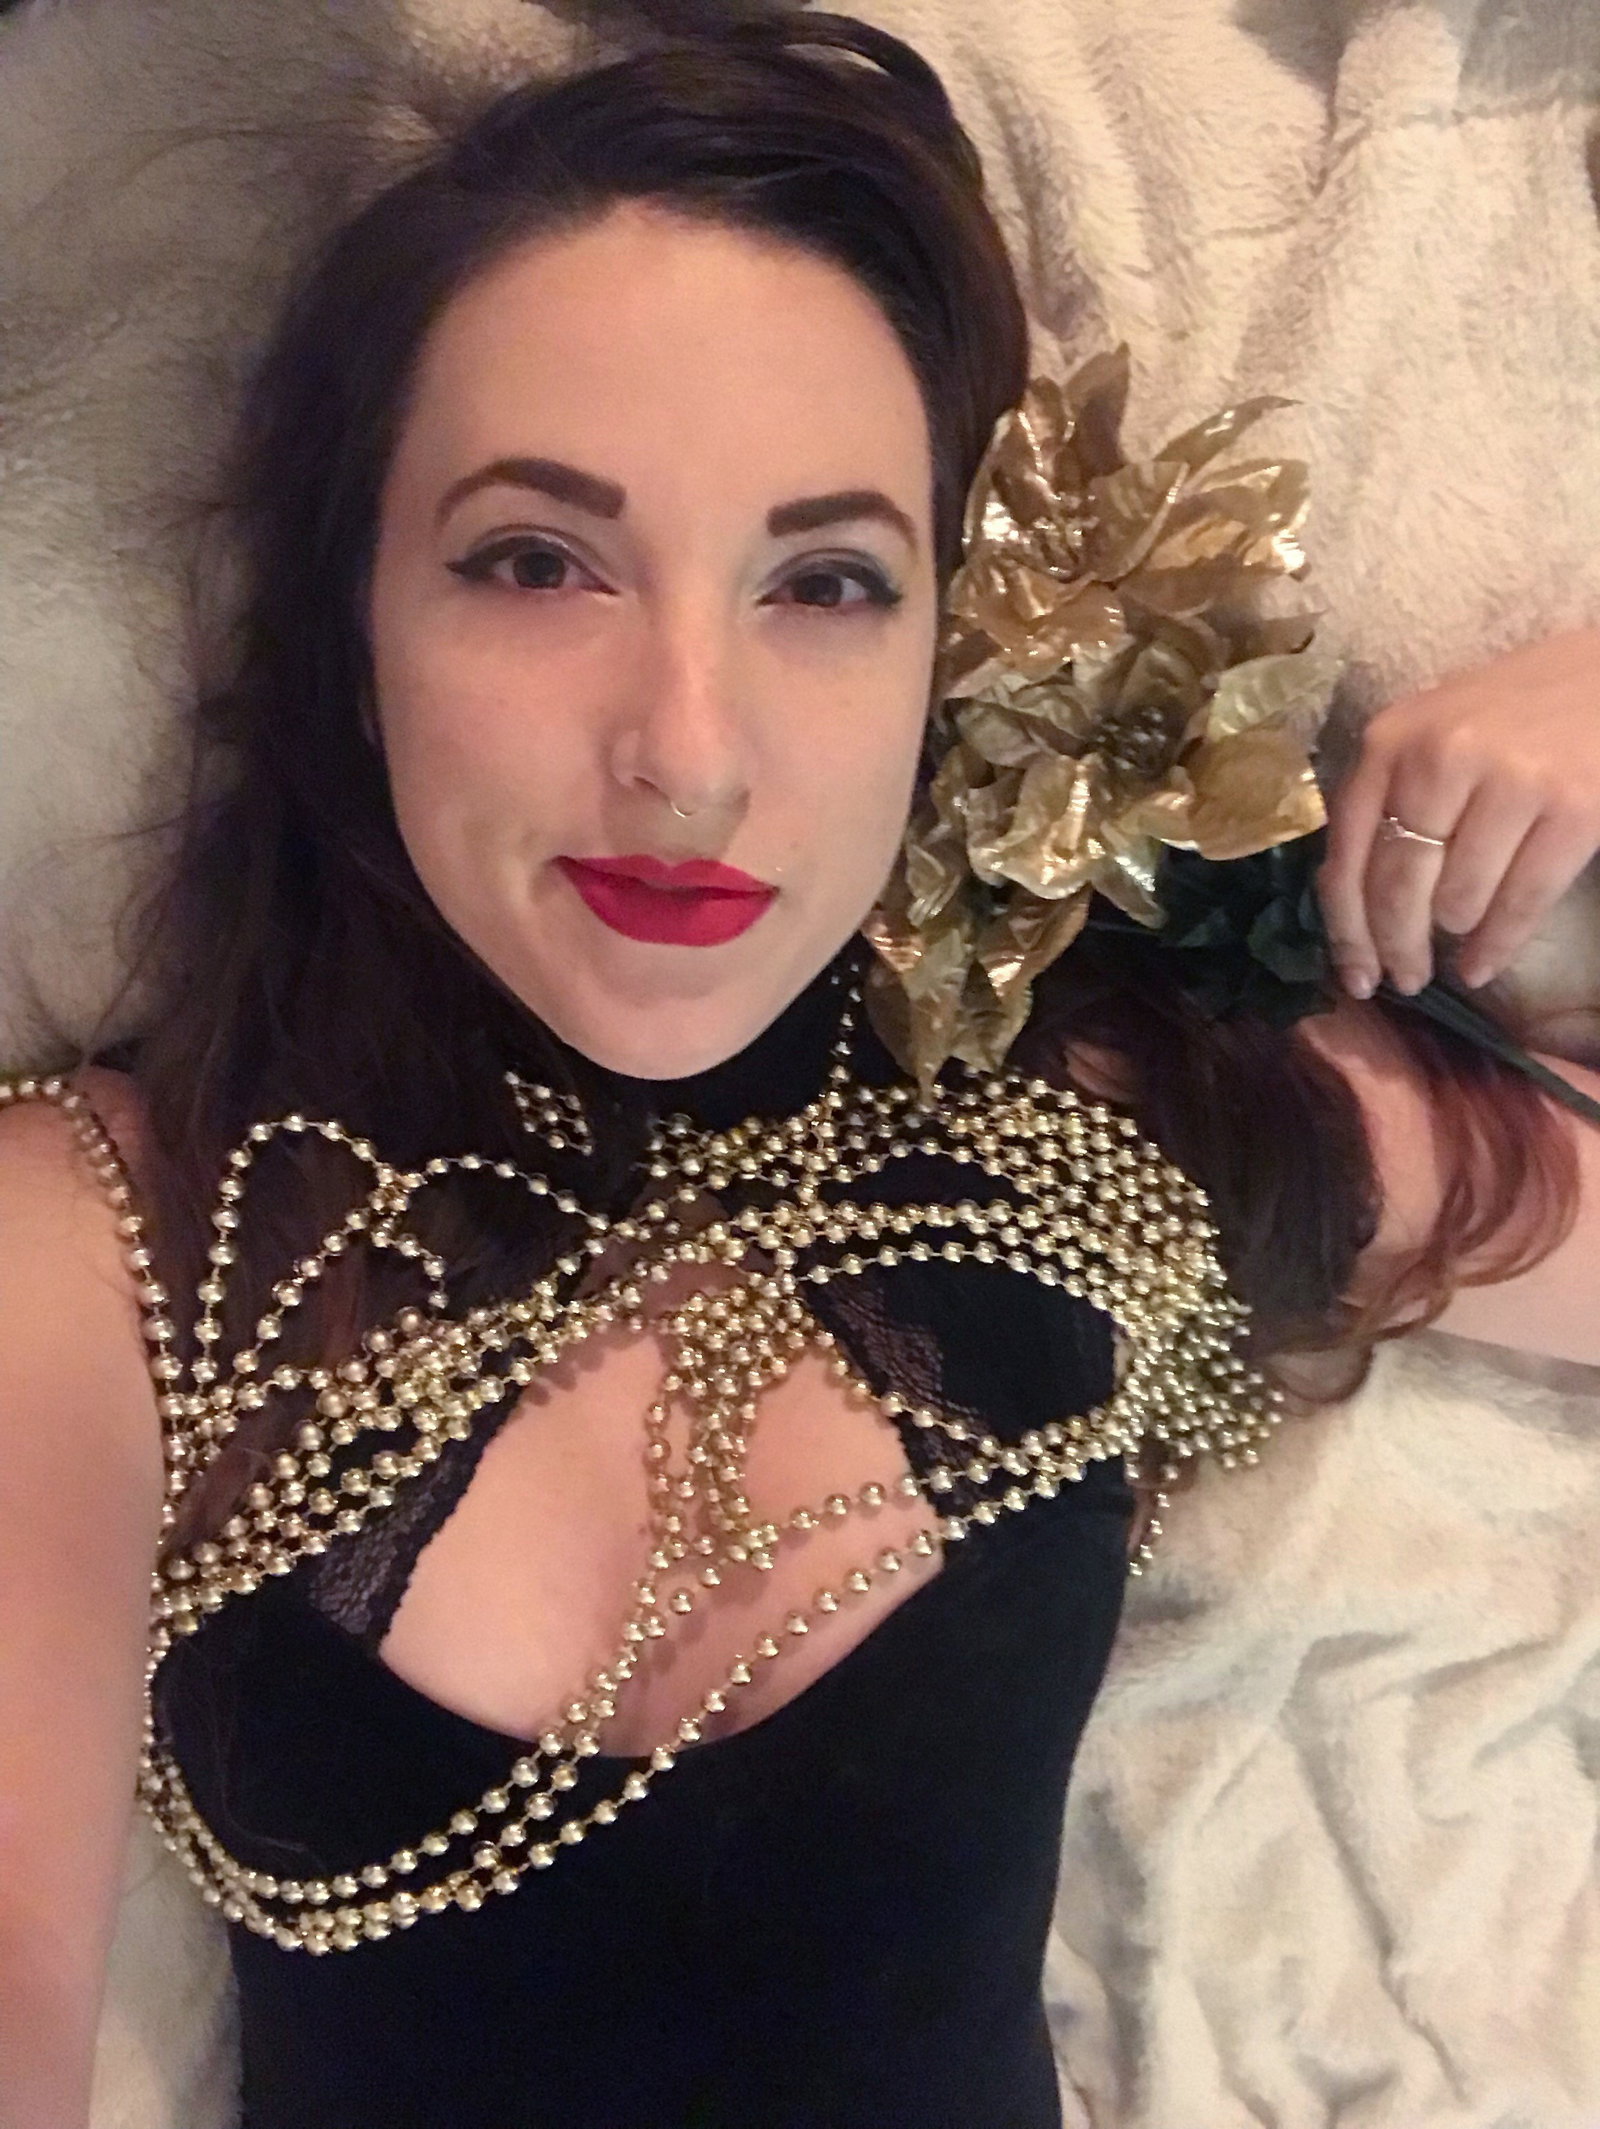 Photo by HomeGrownVideo with the username @HomeGrownVideo, who is a brand user,  December 20, 2019 at 12:50 AM and the text says 'www.homegrownvideo.com for all the beautiful, spirited girls this holiday season :) #christmas #holidays #holidaygirls #nakedgirls #christmasspirit #brunette #sexygirl'